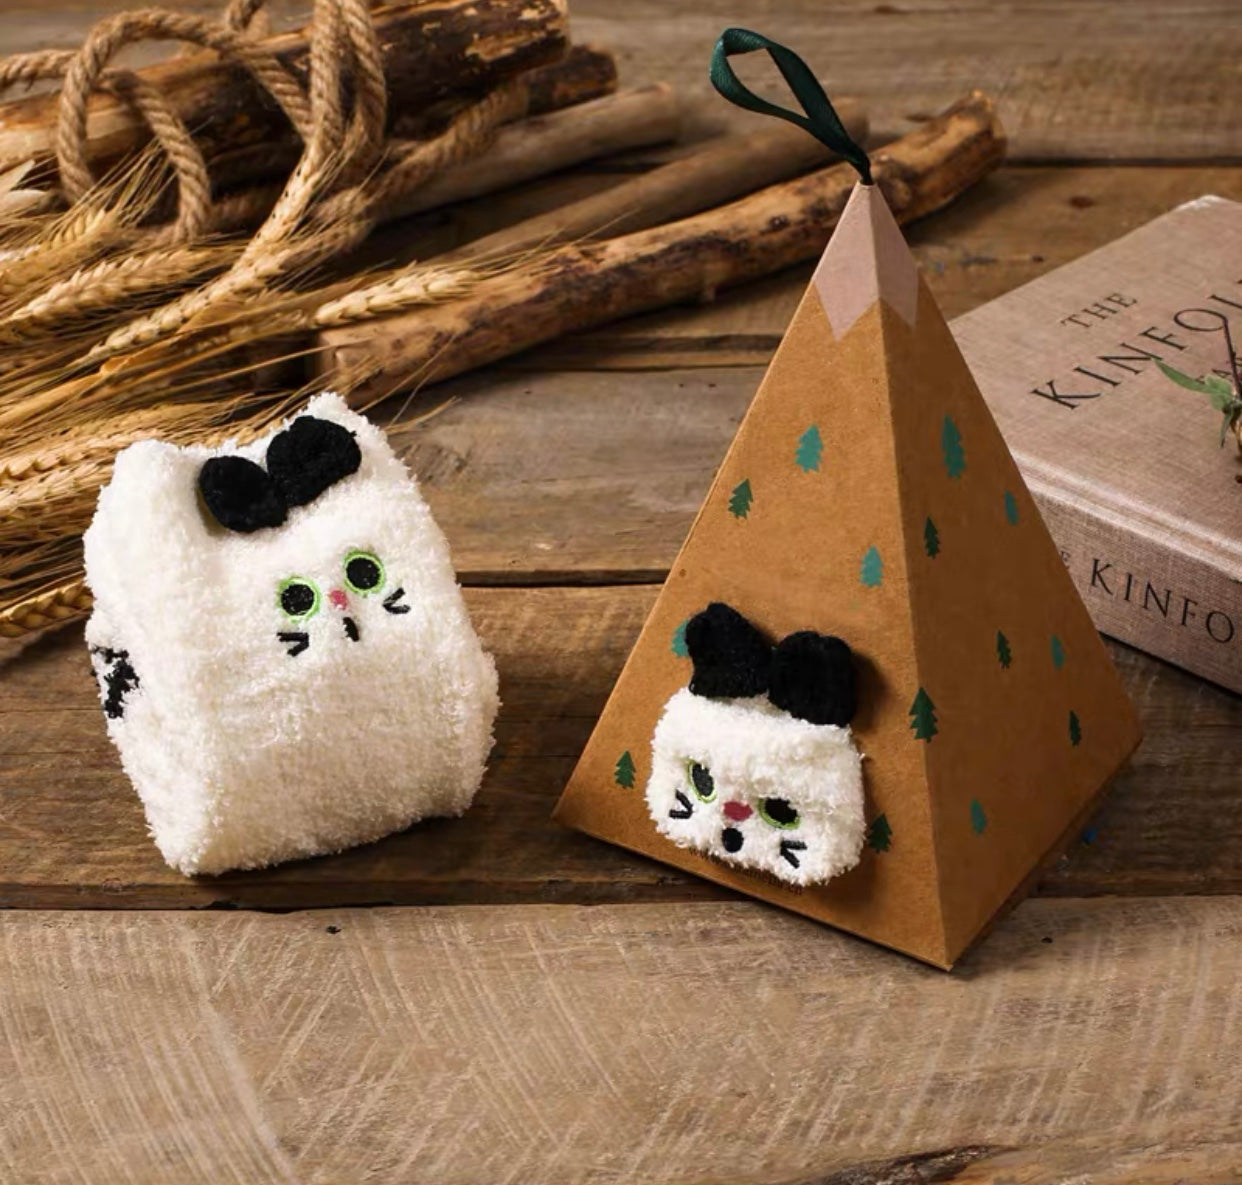 White Kitty Cat with paws Socks in a Box